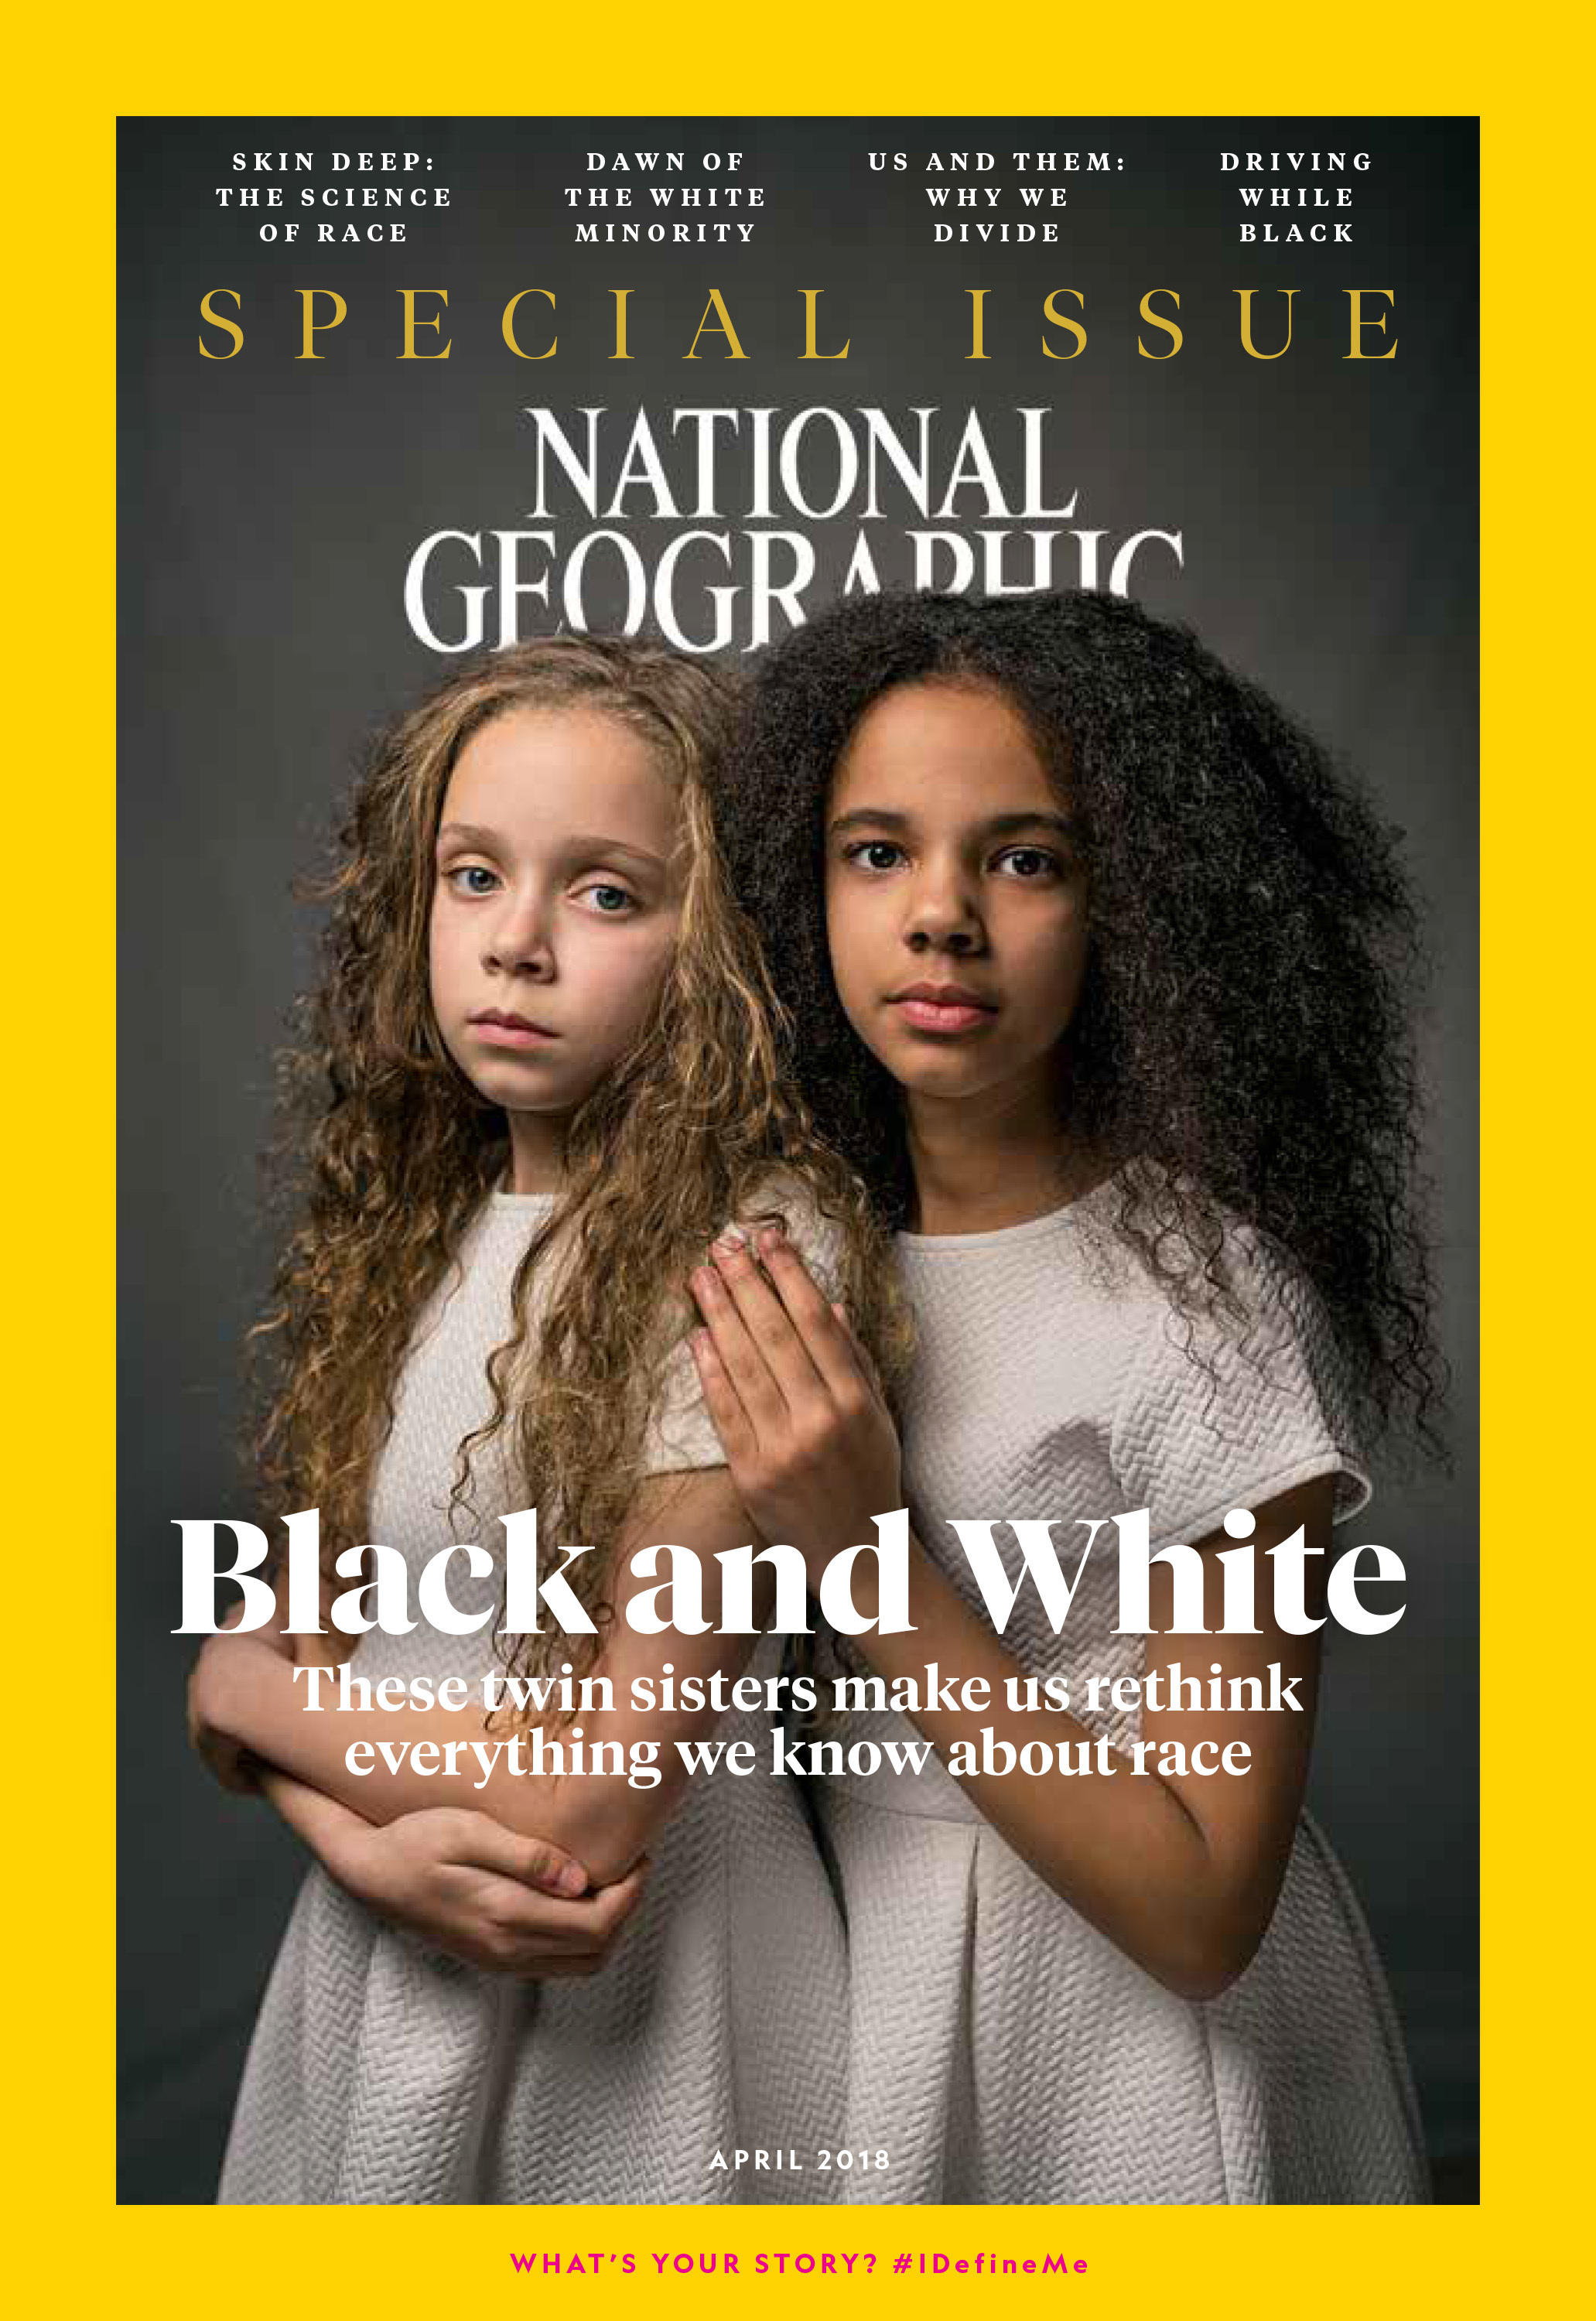 "national geographic" reckons with its past: "for